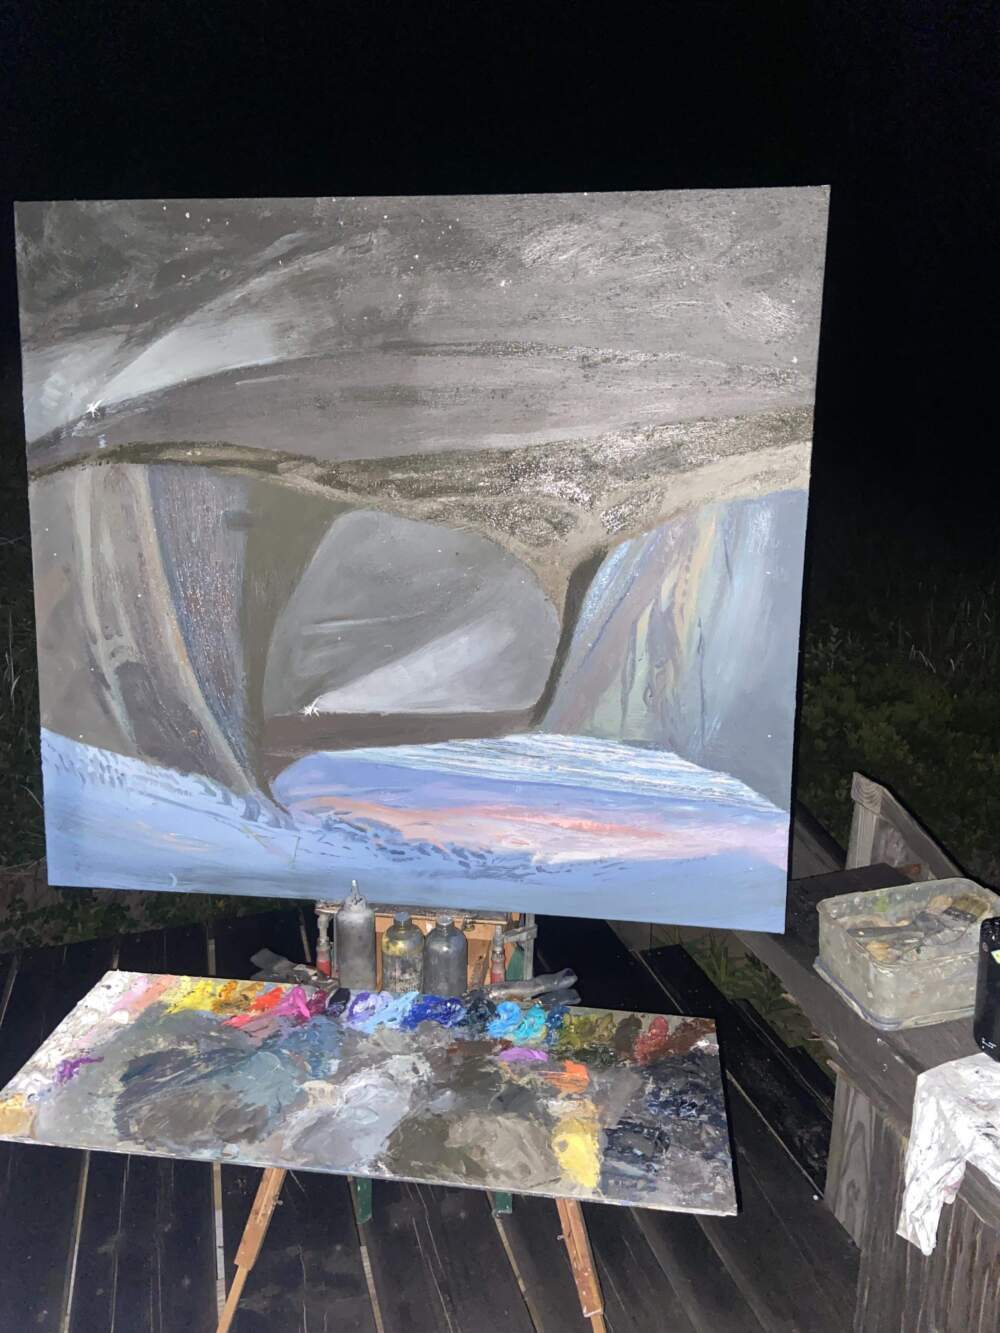 The author's setup for nocturnal painting in the dunes. (Courtesy Elizabeth Flood)